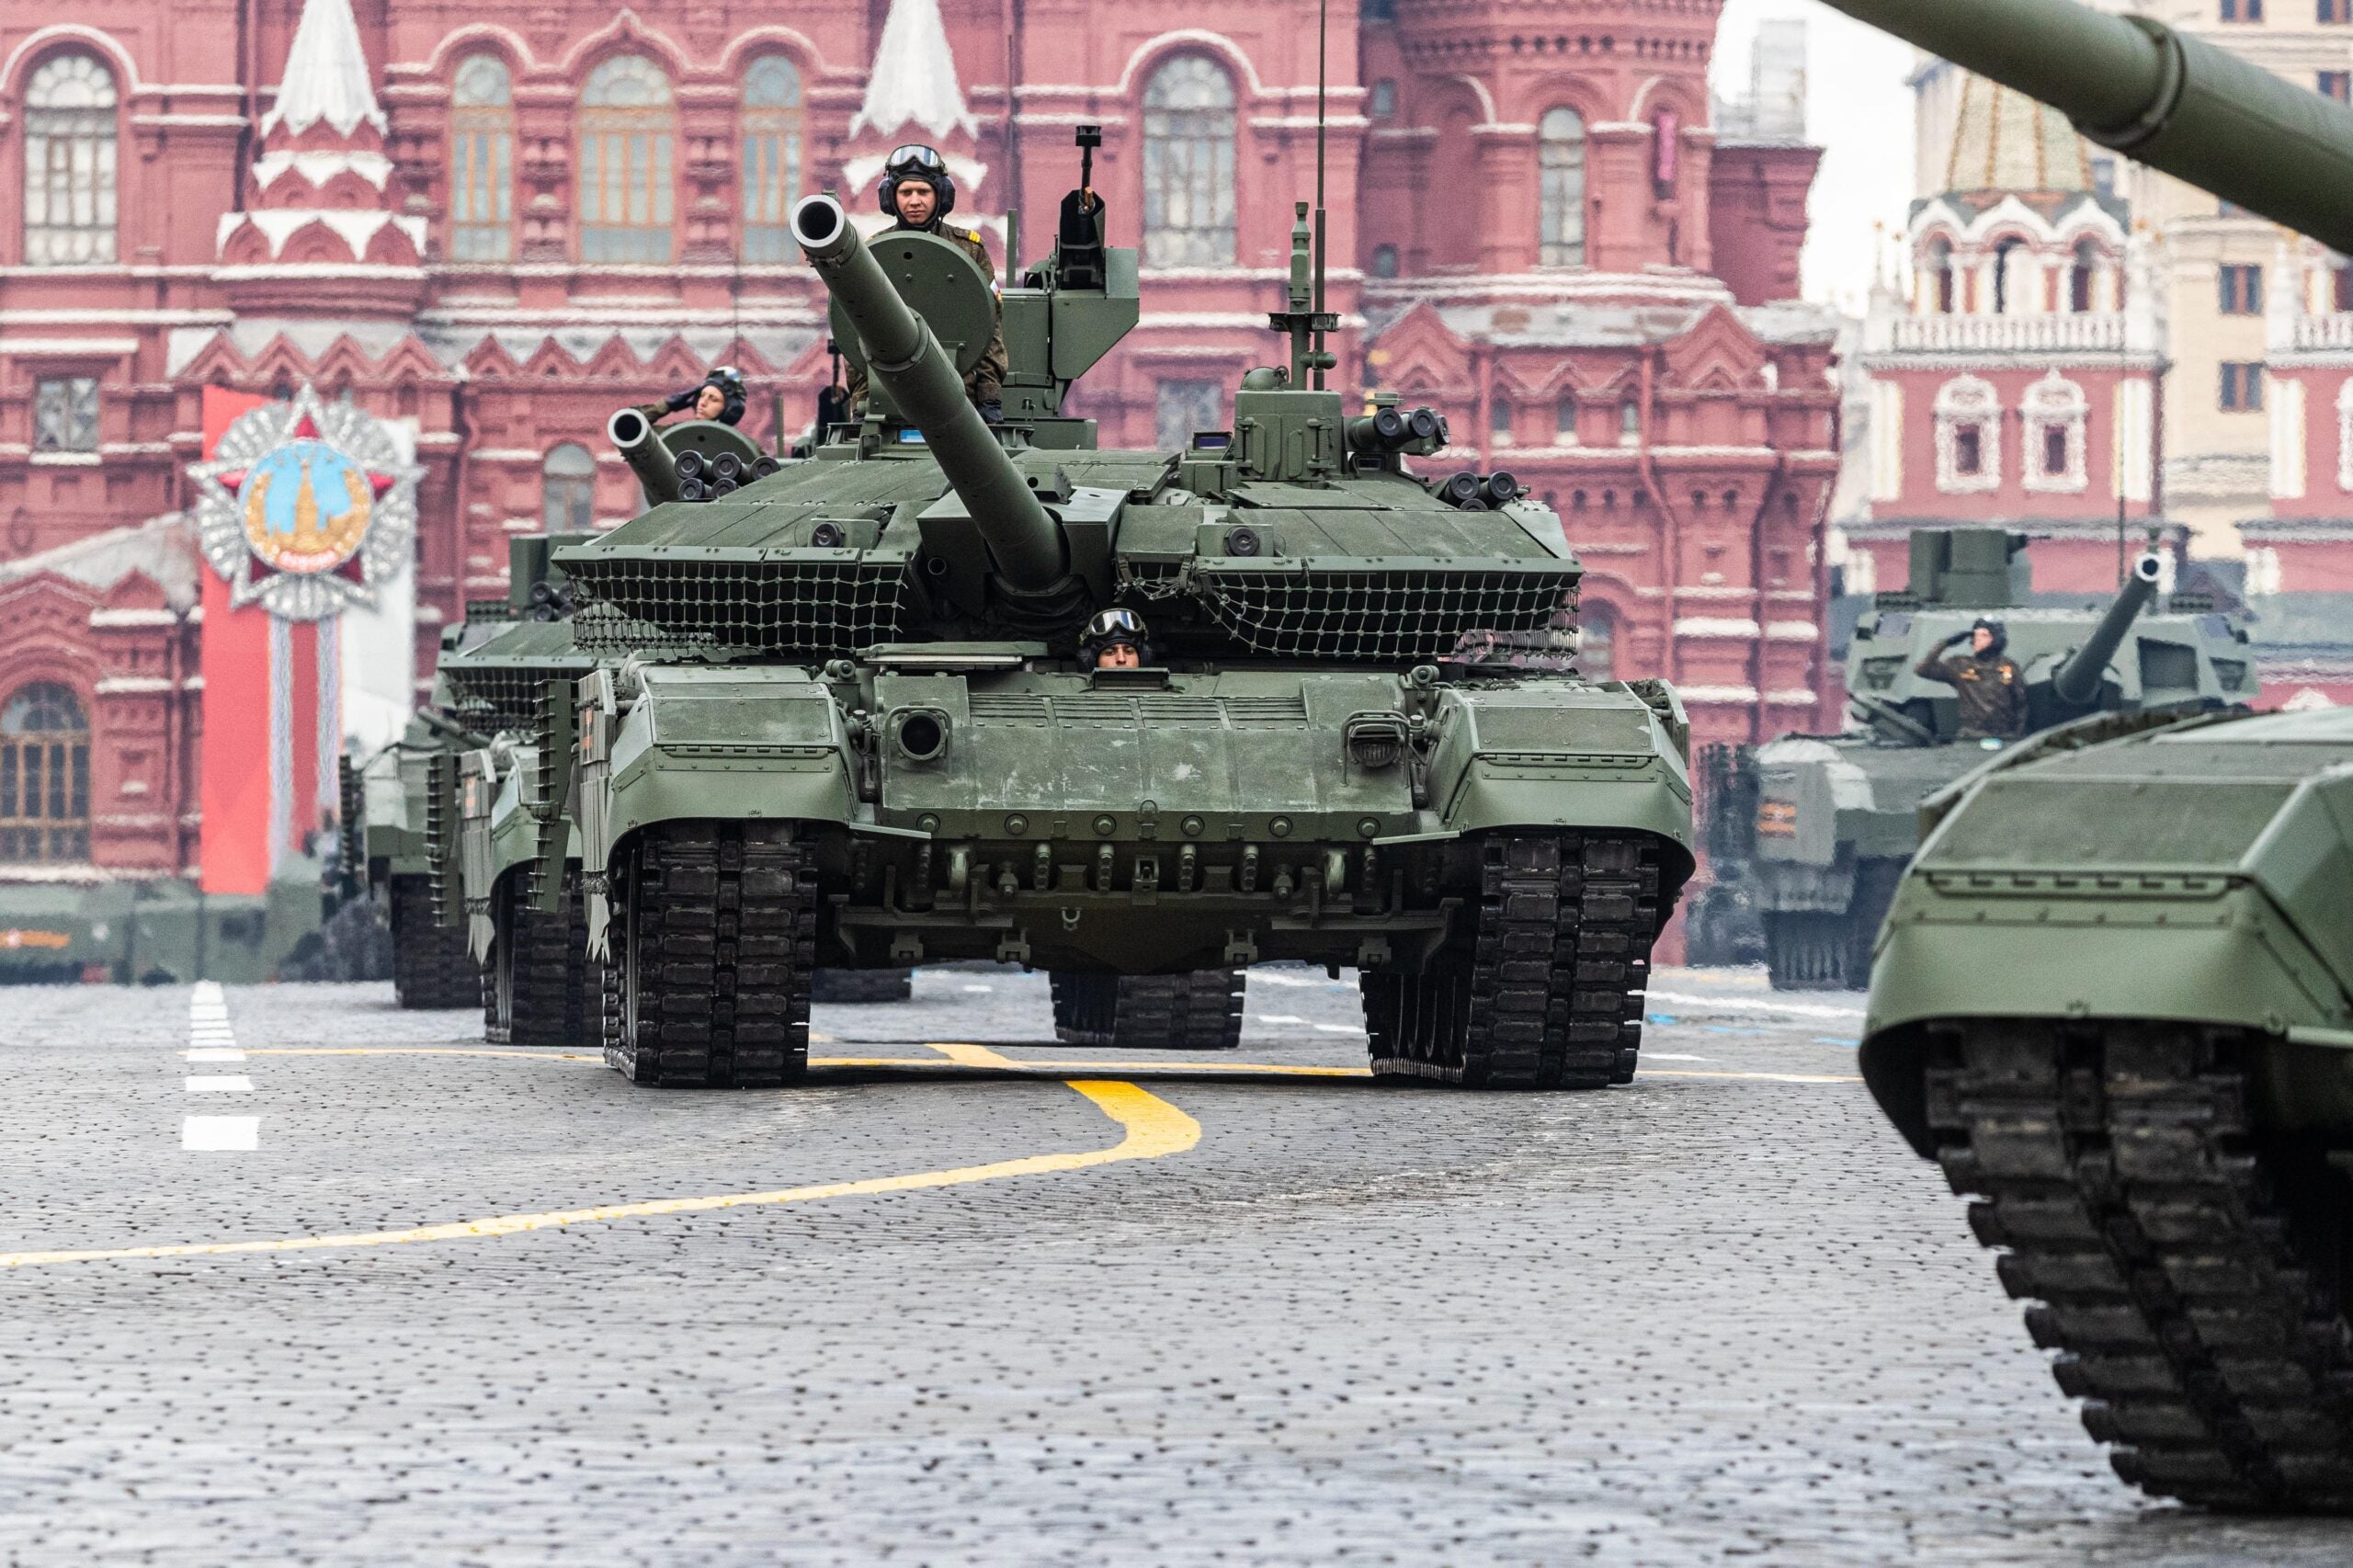 T-90M tanks are seen during the Victory Day military parade to mark the 77th anniversary of the victory in the Great Patriotic War on Red Square in Moscow, Russia, May 9, 2022. (Photo by Bai Xueqi/Xinhua via Getty Images)